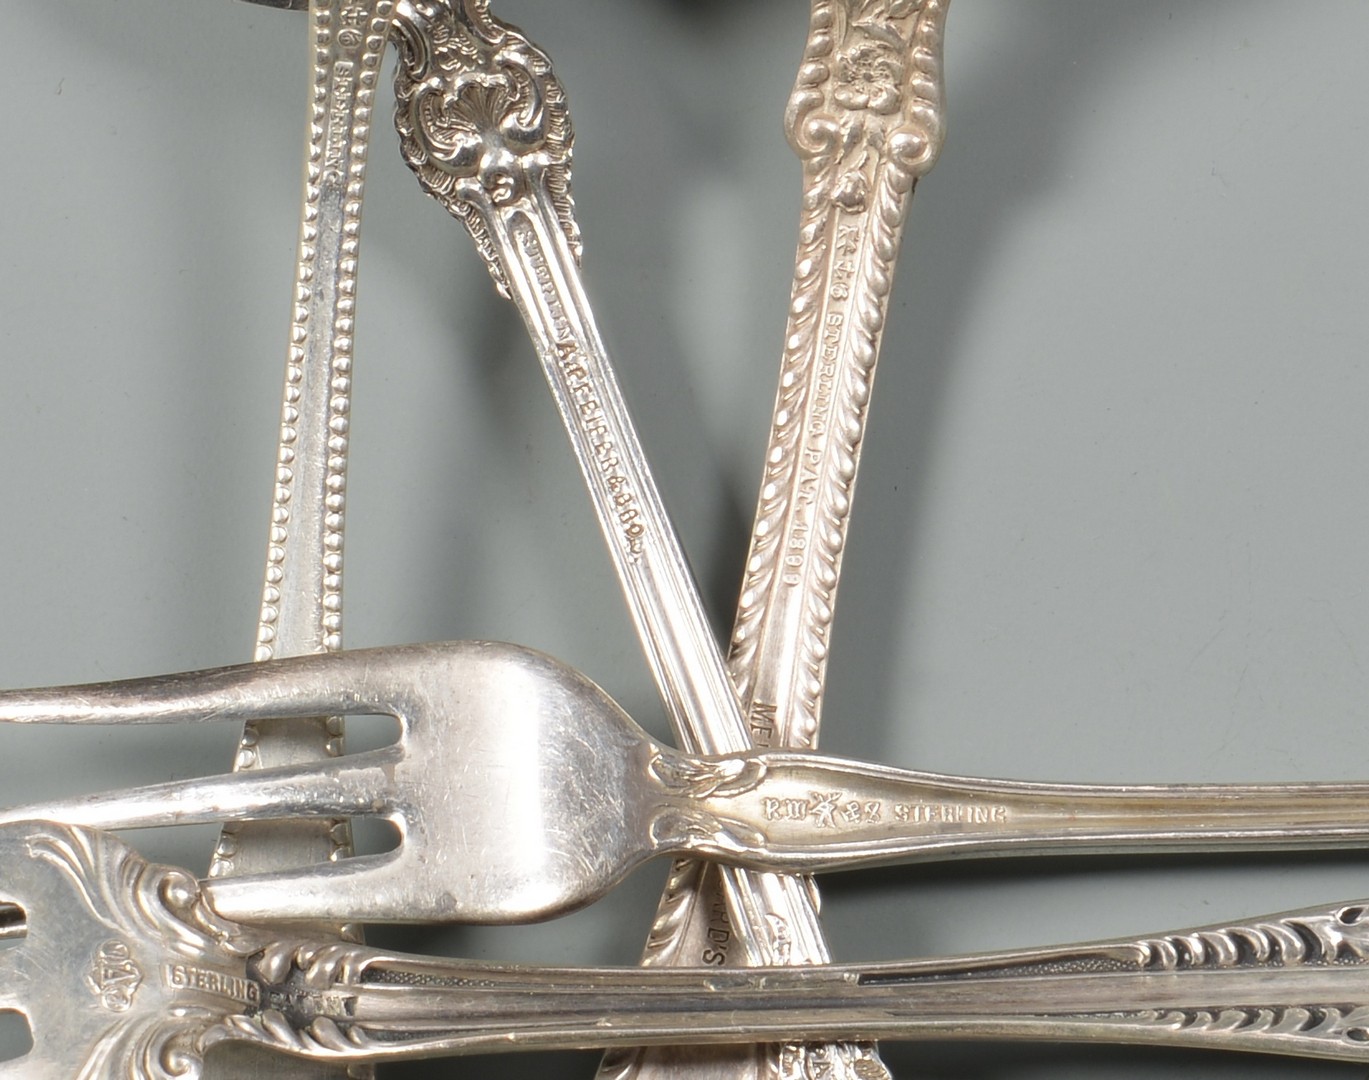 Lot 958: Grouping of Vintage Sterling Flatware